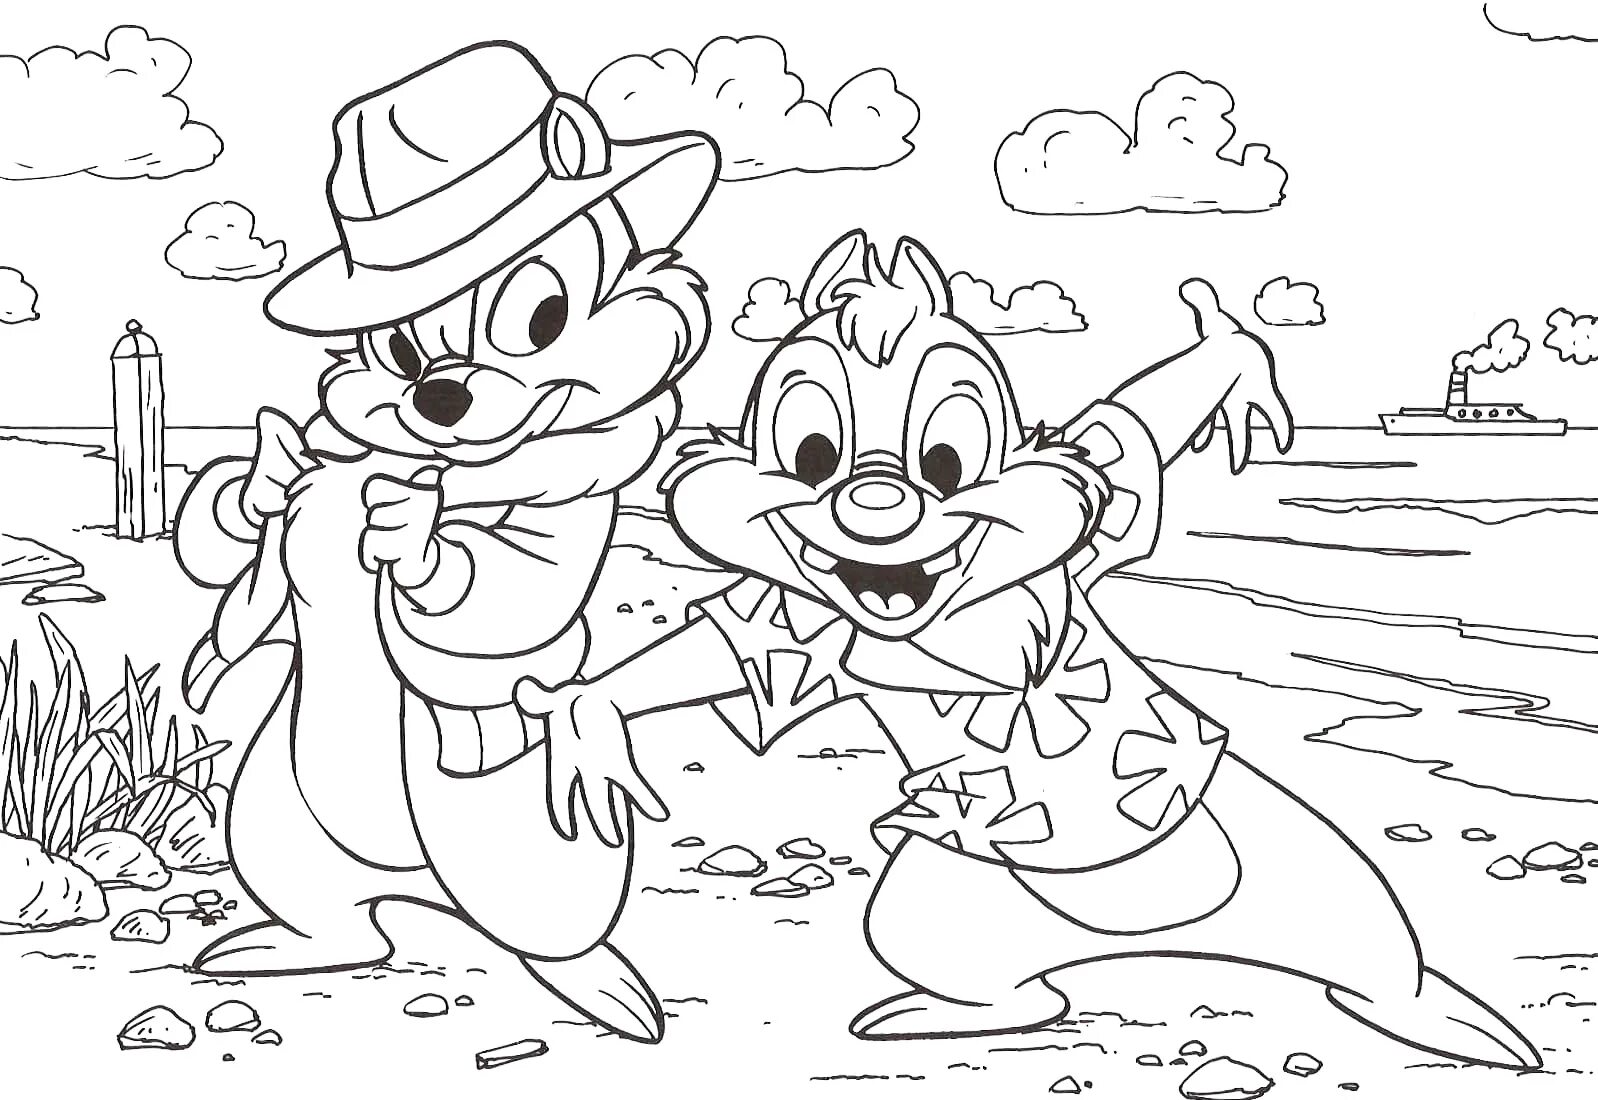 Chip and dale Rescue Rangers #2